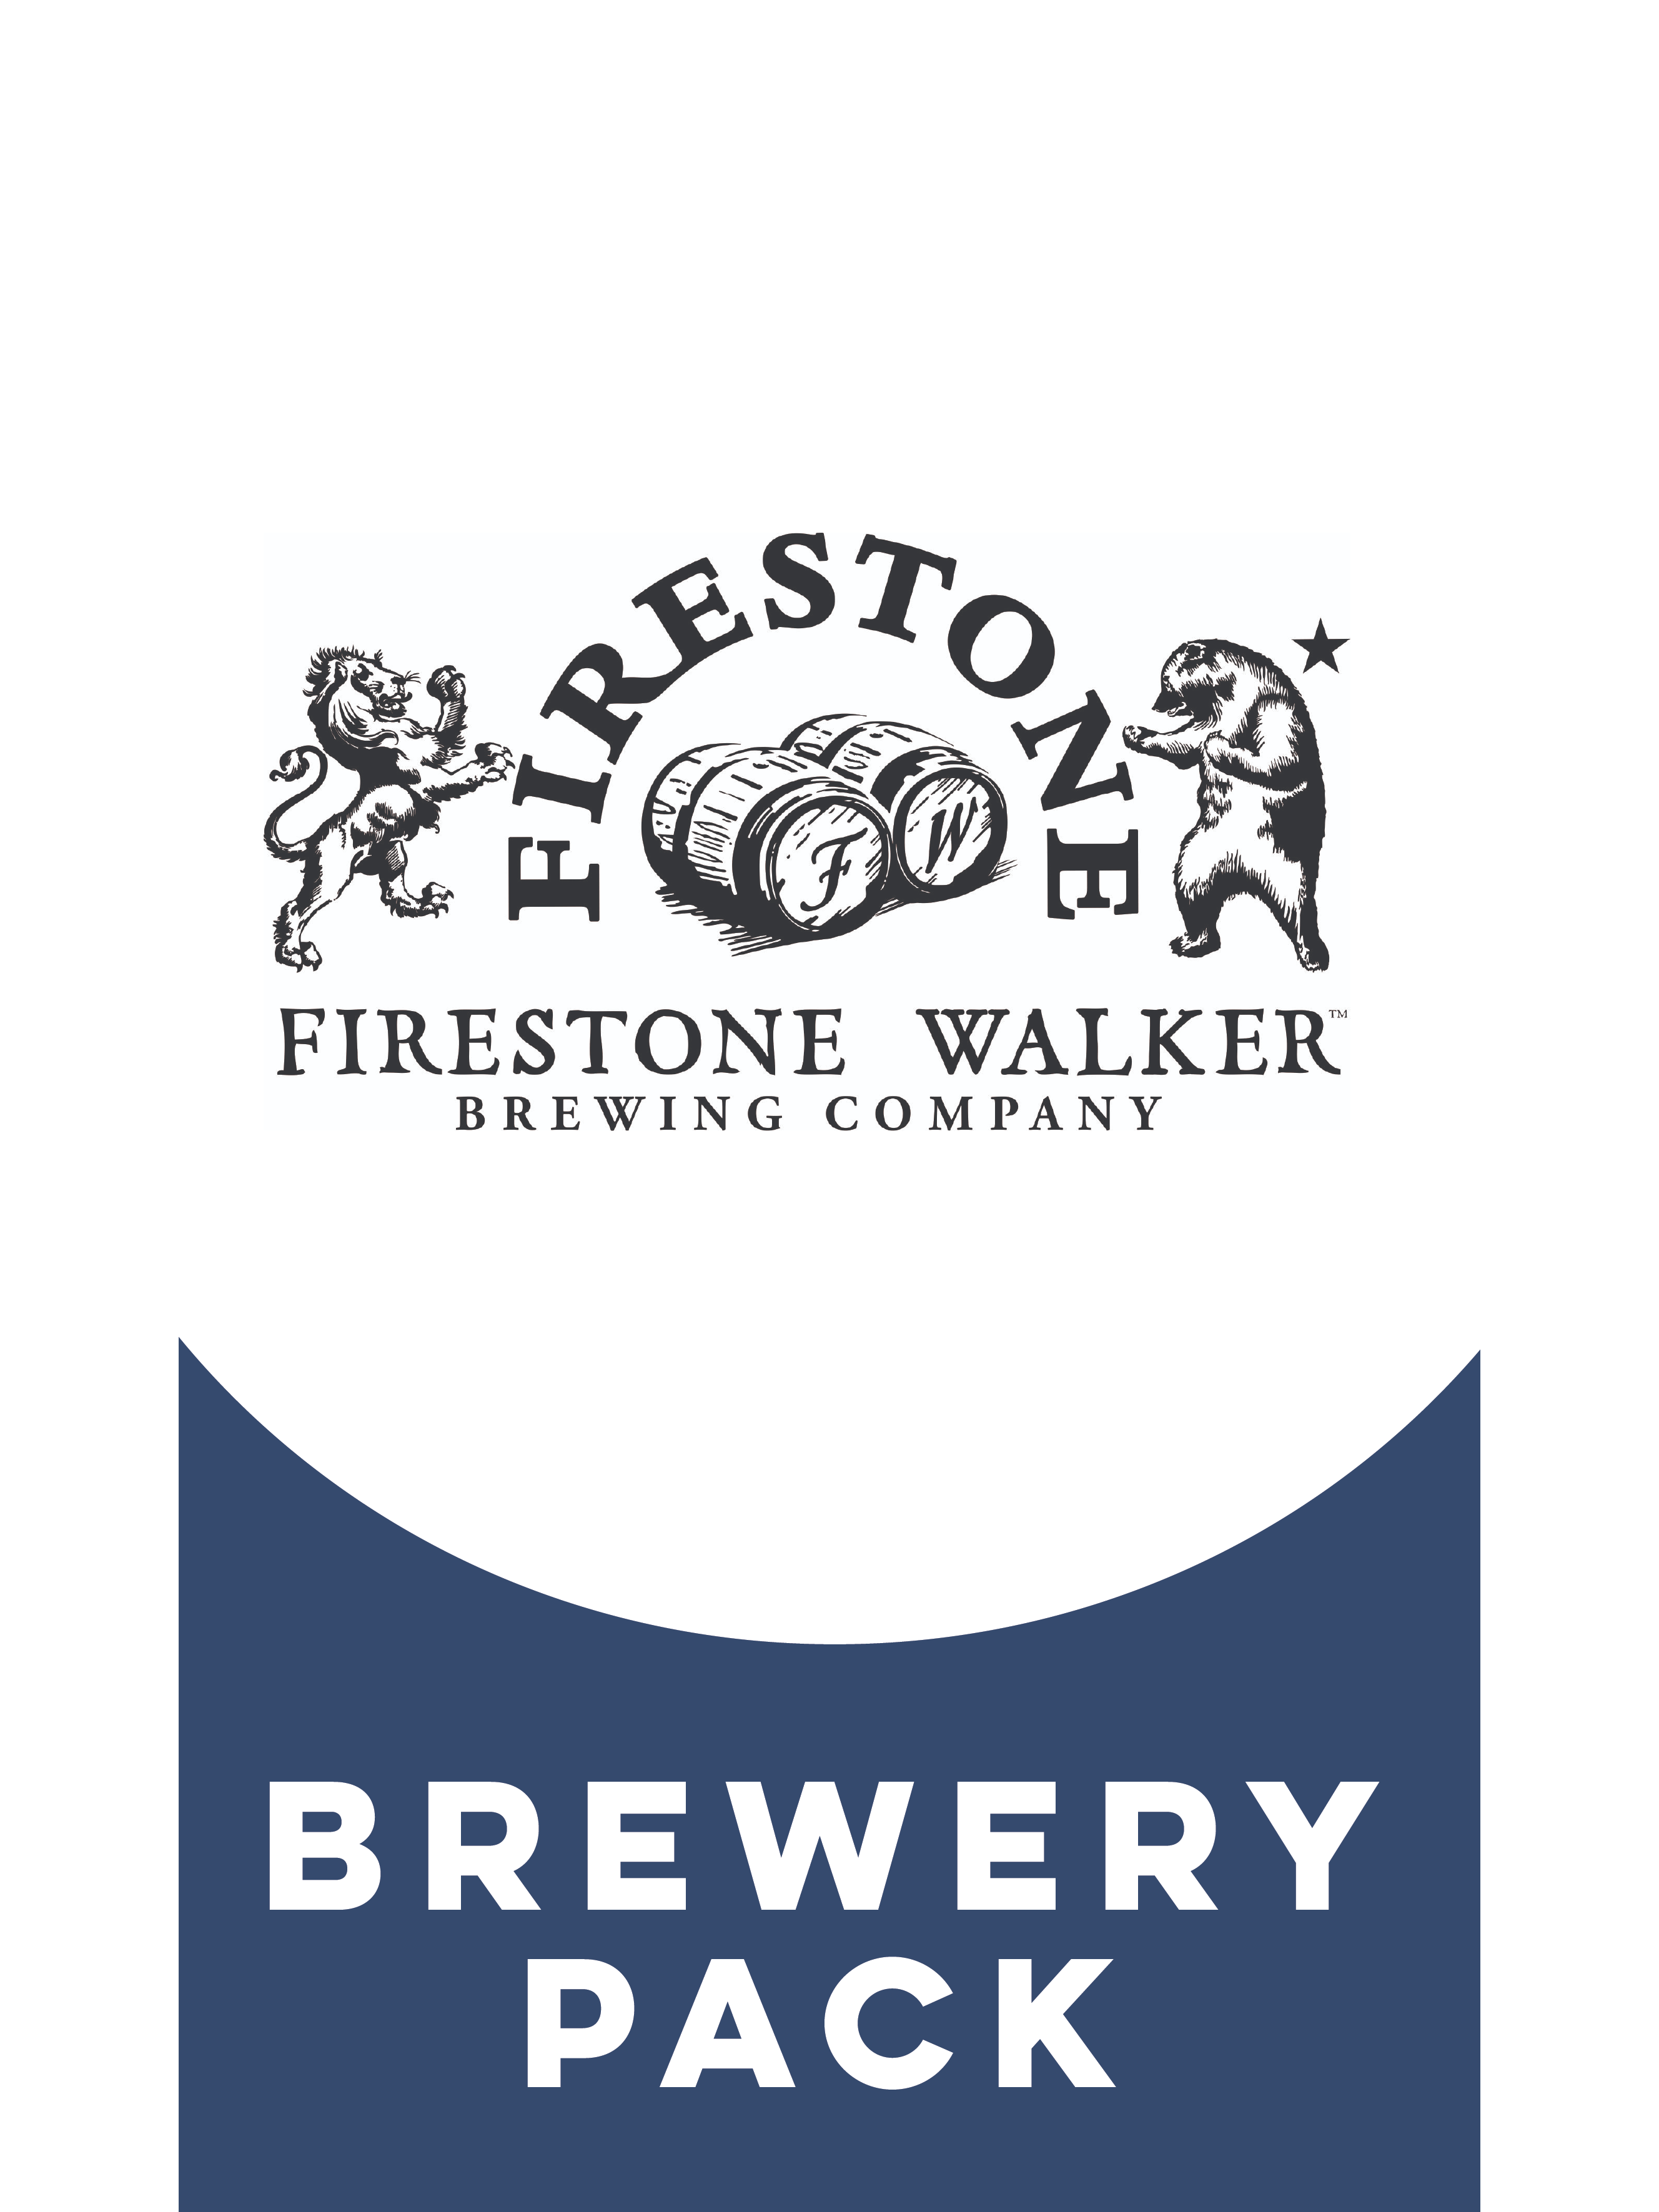 -Firestone Walker- Firestone Walker Barrel Aged Cocktail Inspired Brewery Pack-Packs & Cases- Only @ Beer Republic - The best online beer store for American & Canadian craft beer - Buy beer online from the USA and Canada - Bier online kopen - Amerikaans bier kopen - Craft beer store - Craft beer kopen - Amerikanisch bier kaufen - Bier online kaufen - Acheter biere online - IPA - Stout - Porter - New England IPA - Hazy IPA - Imperial Stout - Barrel Aged - Barrel Aged Imperial Stout - Brown - Dark beer - Blon